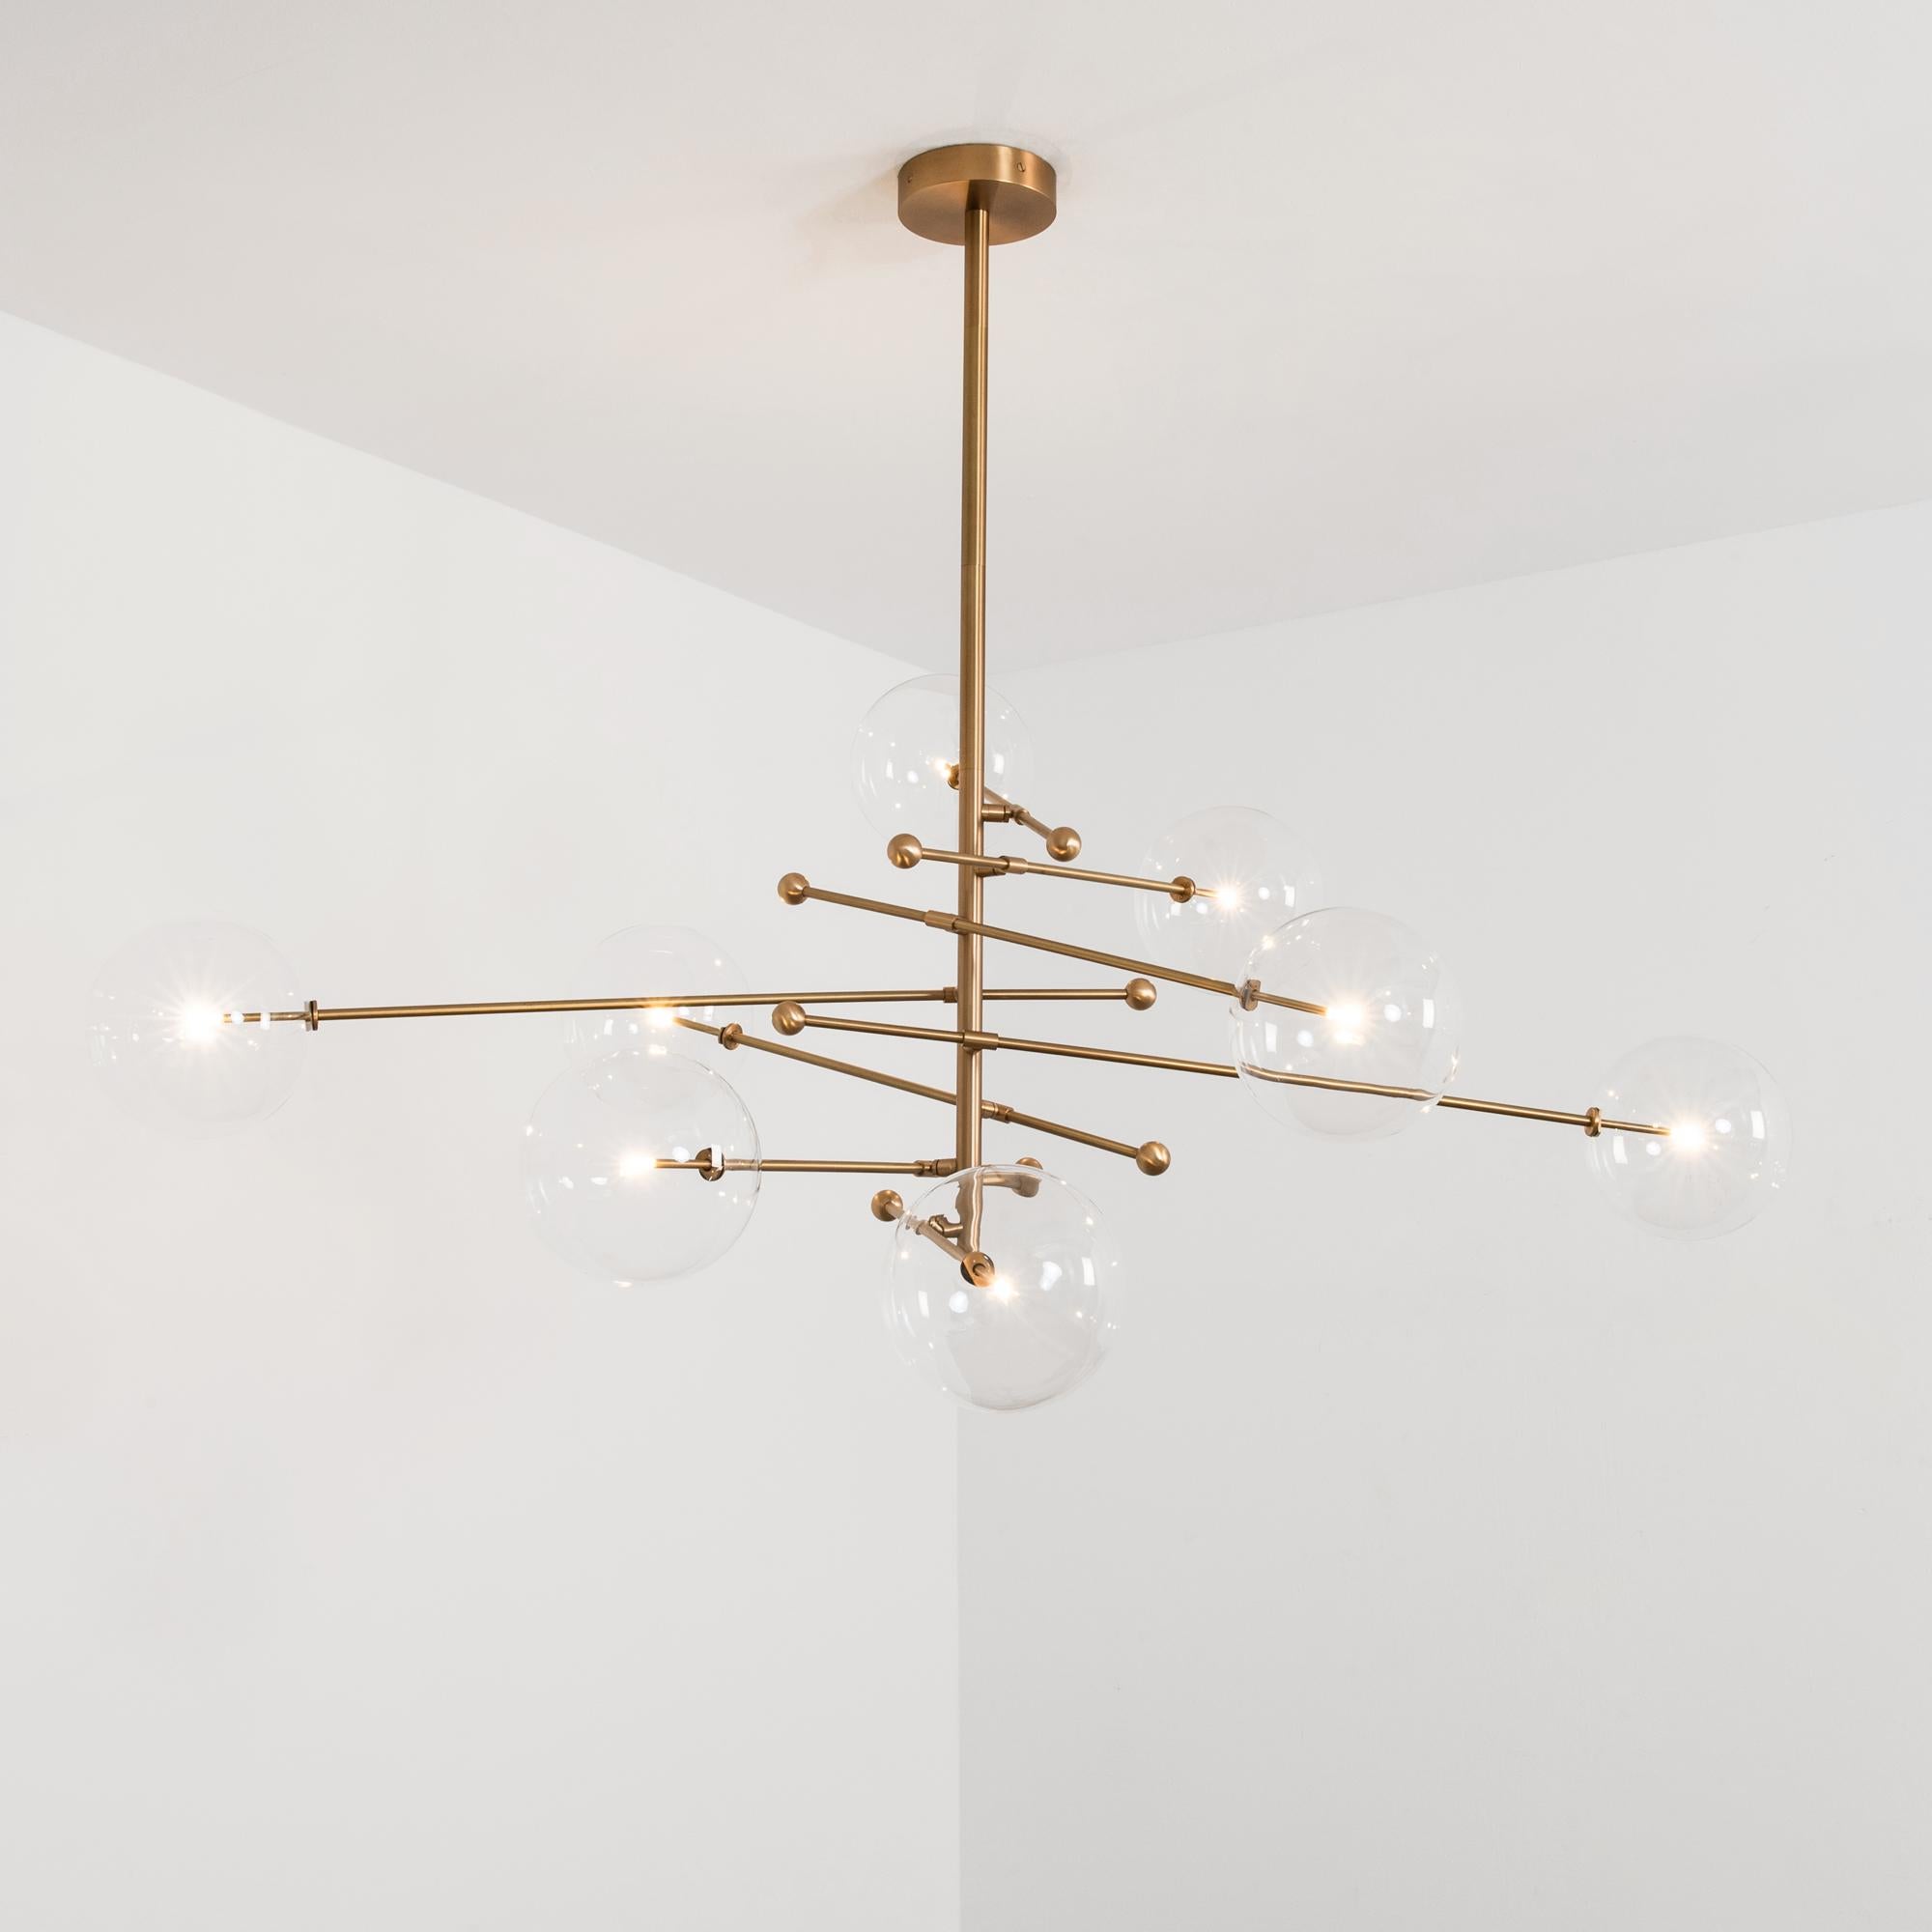 RD15 12 Arms Polished Nickel Chandelier by Schwung 3